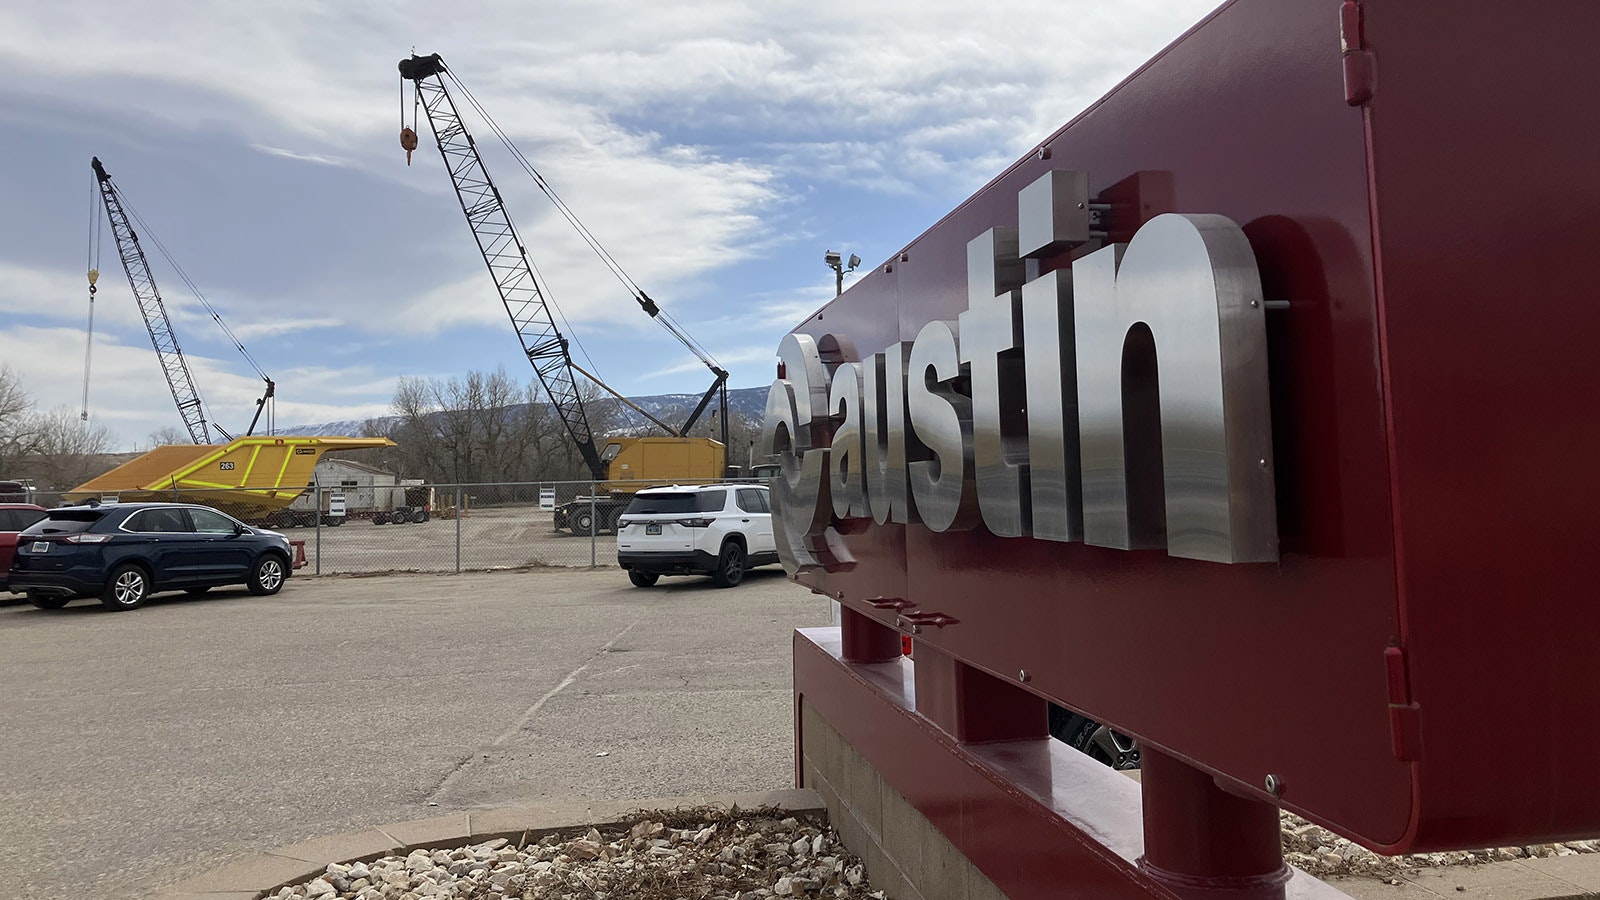 Austin Engineering USA specializes in designing and manufacturing equipment for mines across the continent.